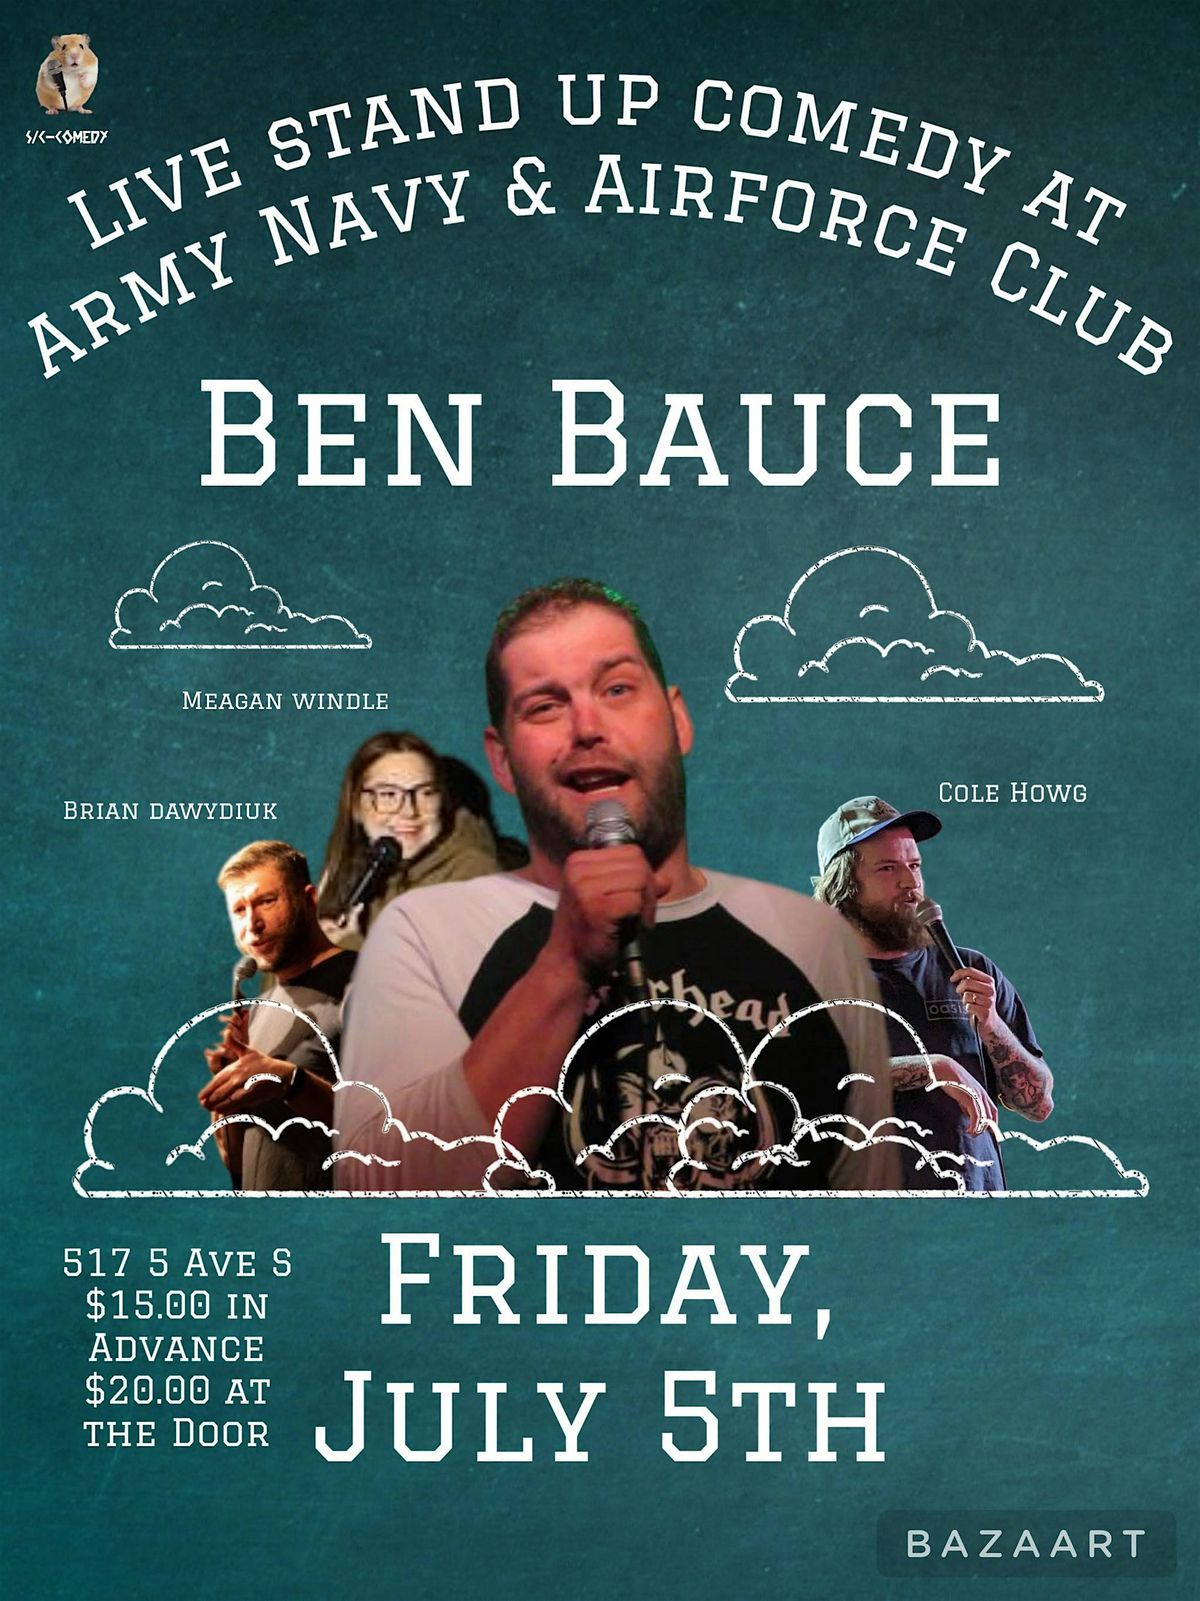 Comedy Night at the Army, Navy & Airforce Club : Featuring Ben Bauce